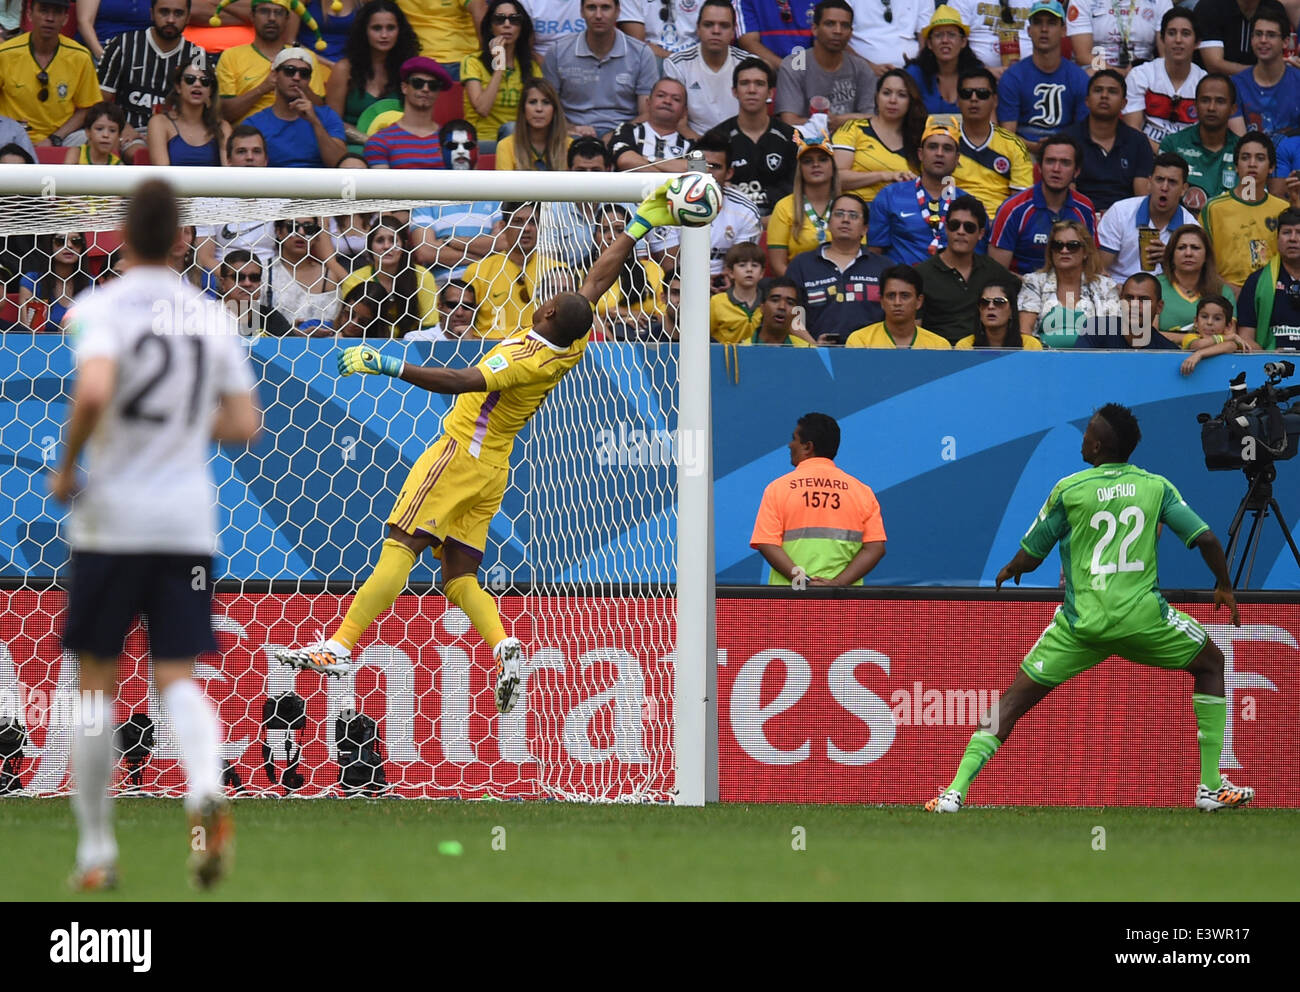 Brasilia, Brazil. 30th June, 2014. Goalkeeper Vincent Enyeama (C) of Nigeria catches the ball during the FIFA World Cup 2014 round of 16 match between France and Nigeria at the Estadio National Stadium in Brasilia, Brazil, on 30 June 2014. Credit:  dpa picture alliance/Alamy Live News Stock Photo